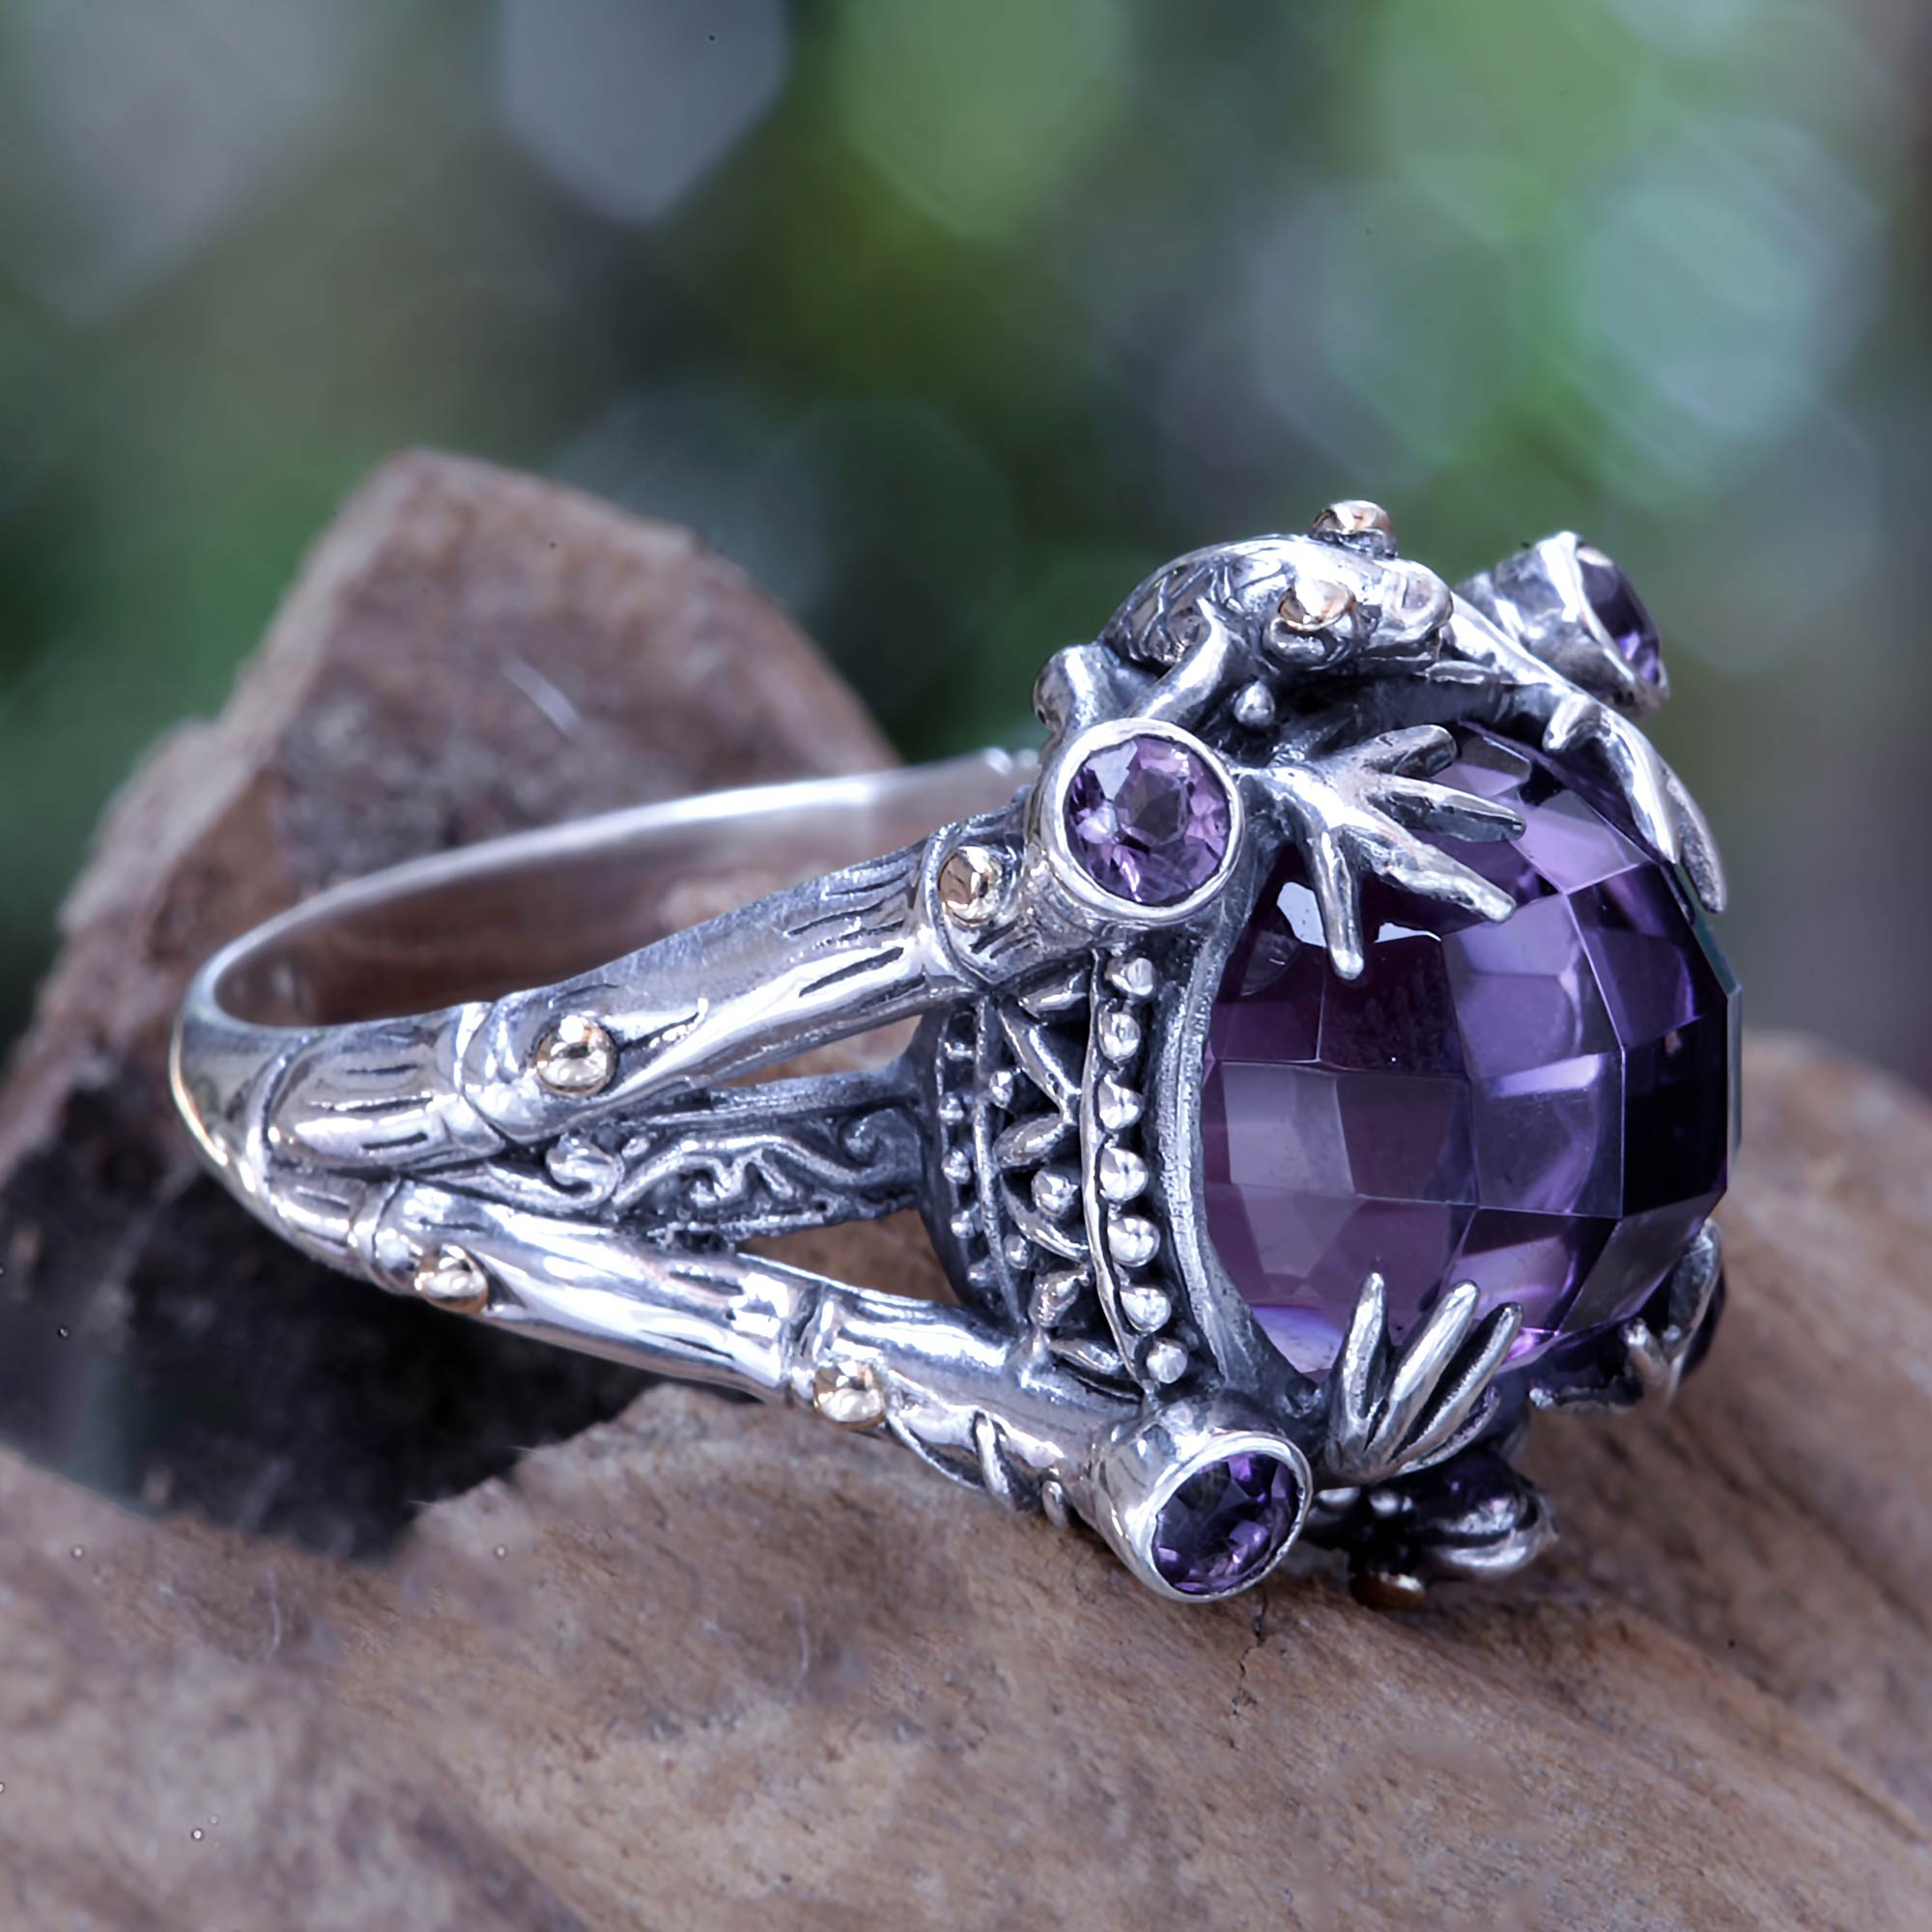 Amethyst Sterling Silver Ring with Gold Accents - Tropical Frogs